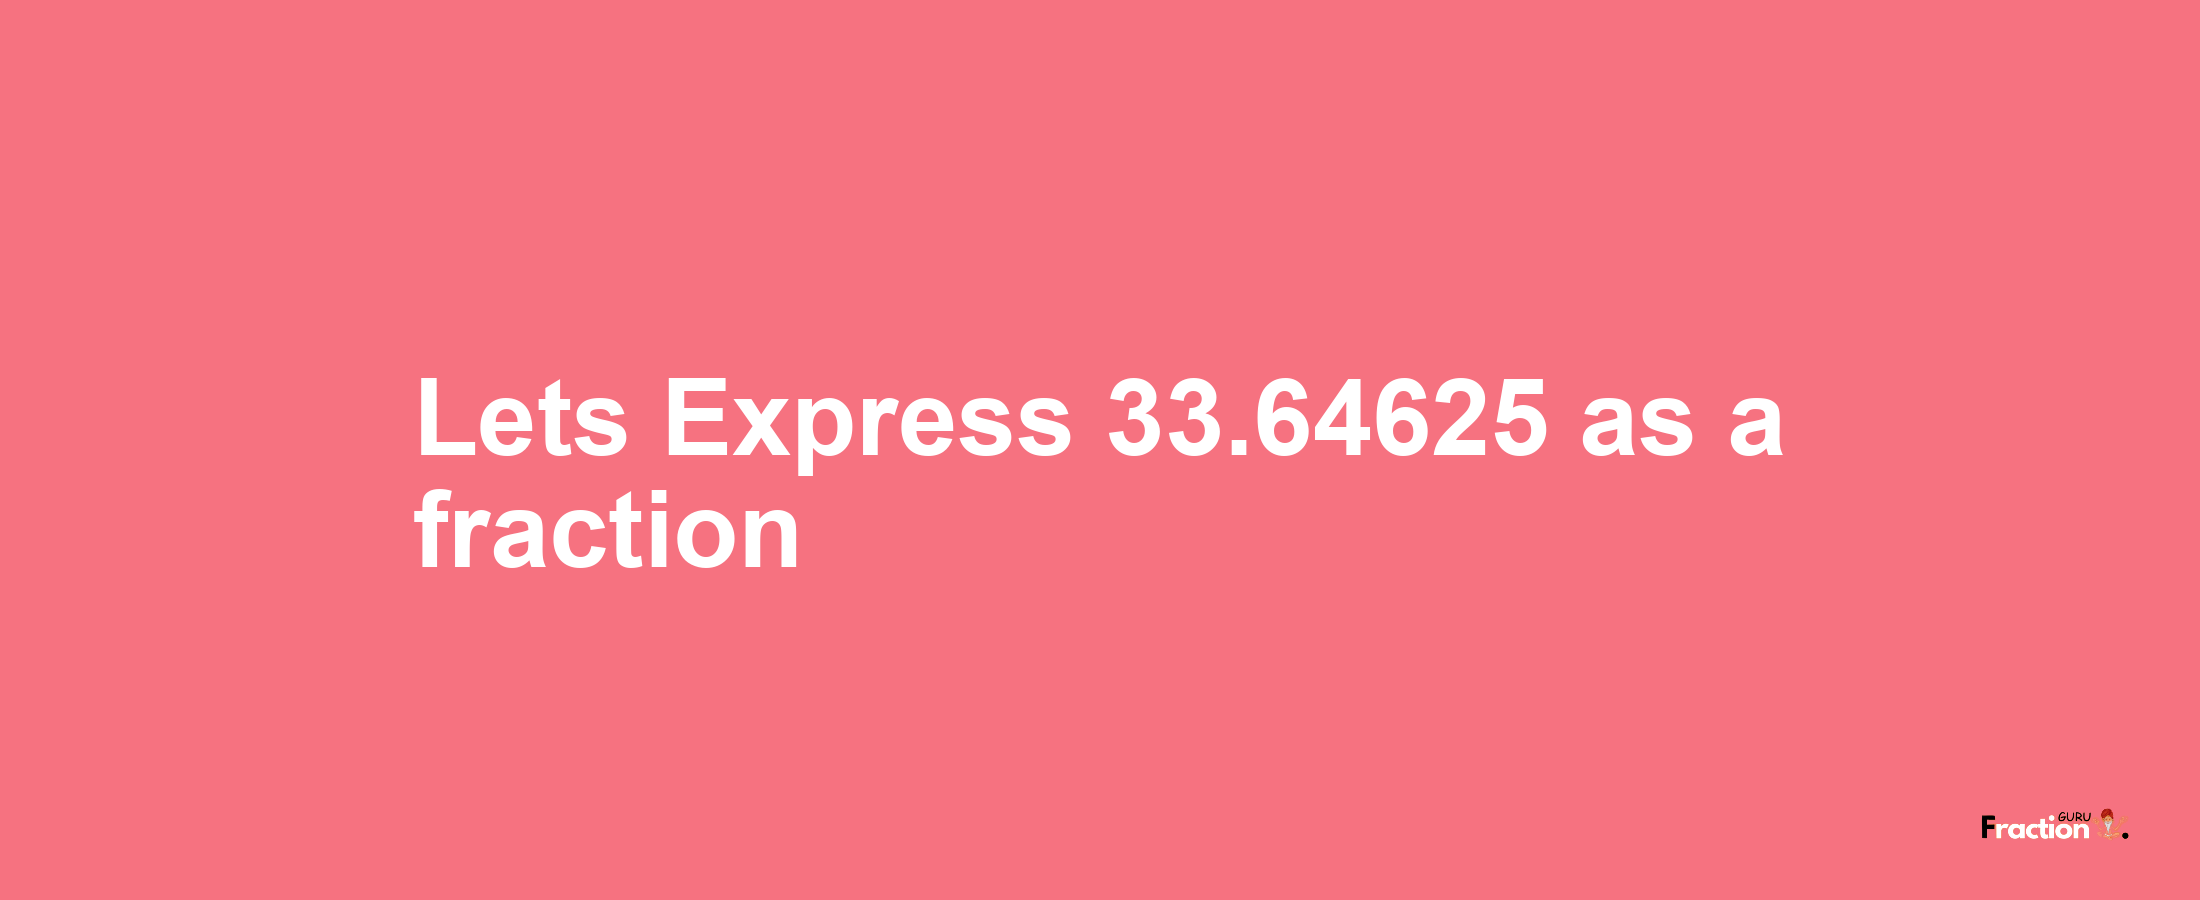 Lets Express 33.64625 as afraction